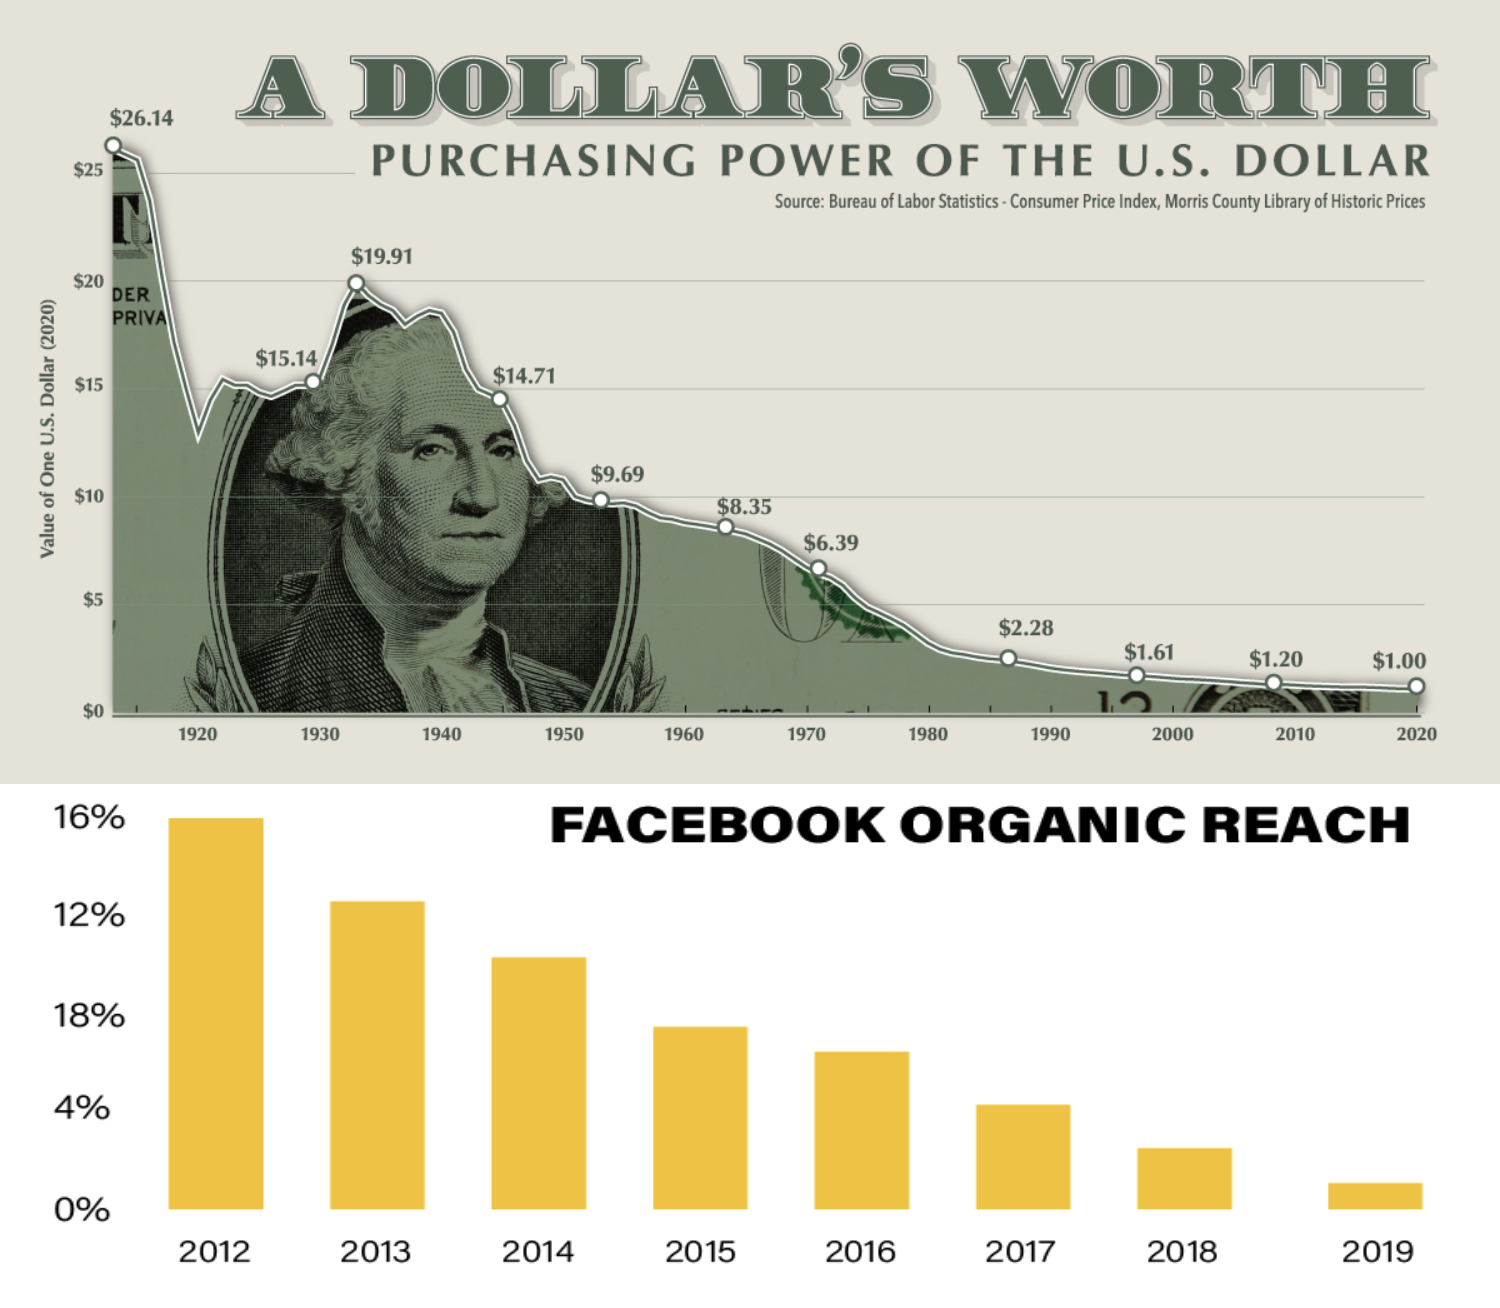 Above, the dramatic decrease of the US Dollar purchasing power over the 20th Century. Chart by Visual Capitalist (https://www.visualcapitalist.com/purchasing-power-of-the-u-s-dollar-over-time/). Below is the steady decline of Facebook's organic reach.